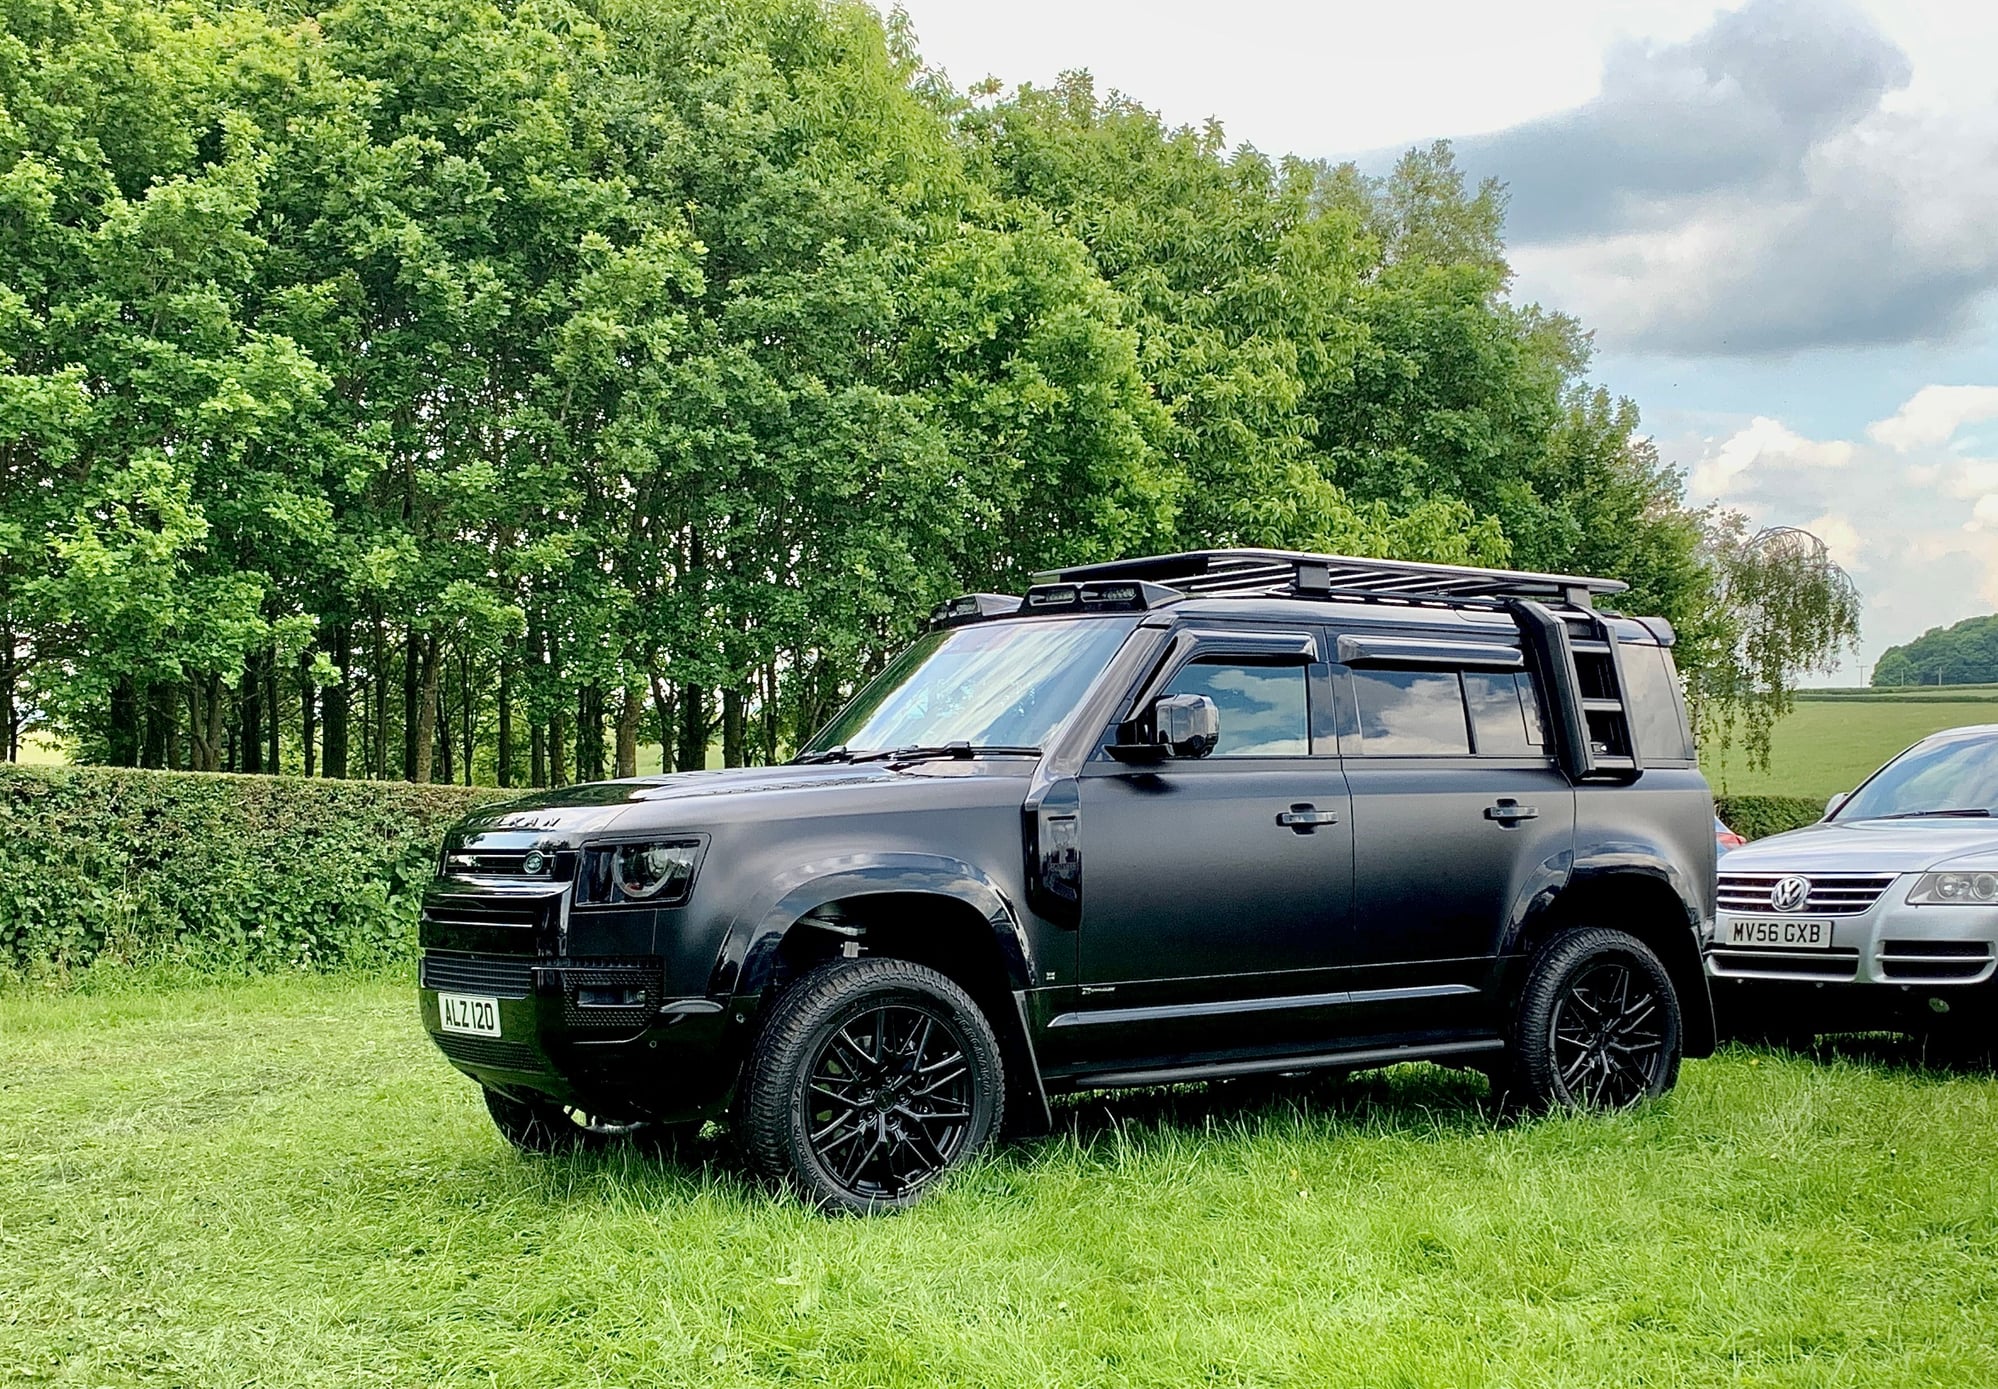 Land Rover Defender Murdered Out With Matte Black Wrap, New Wheels